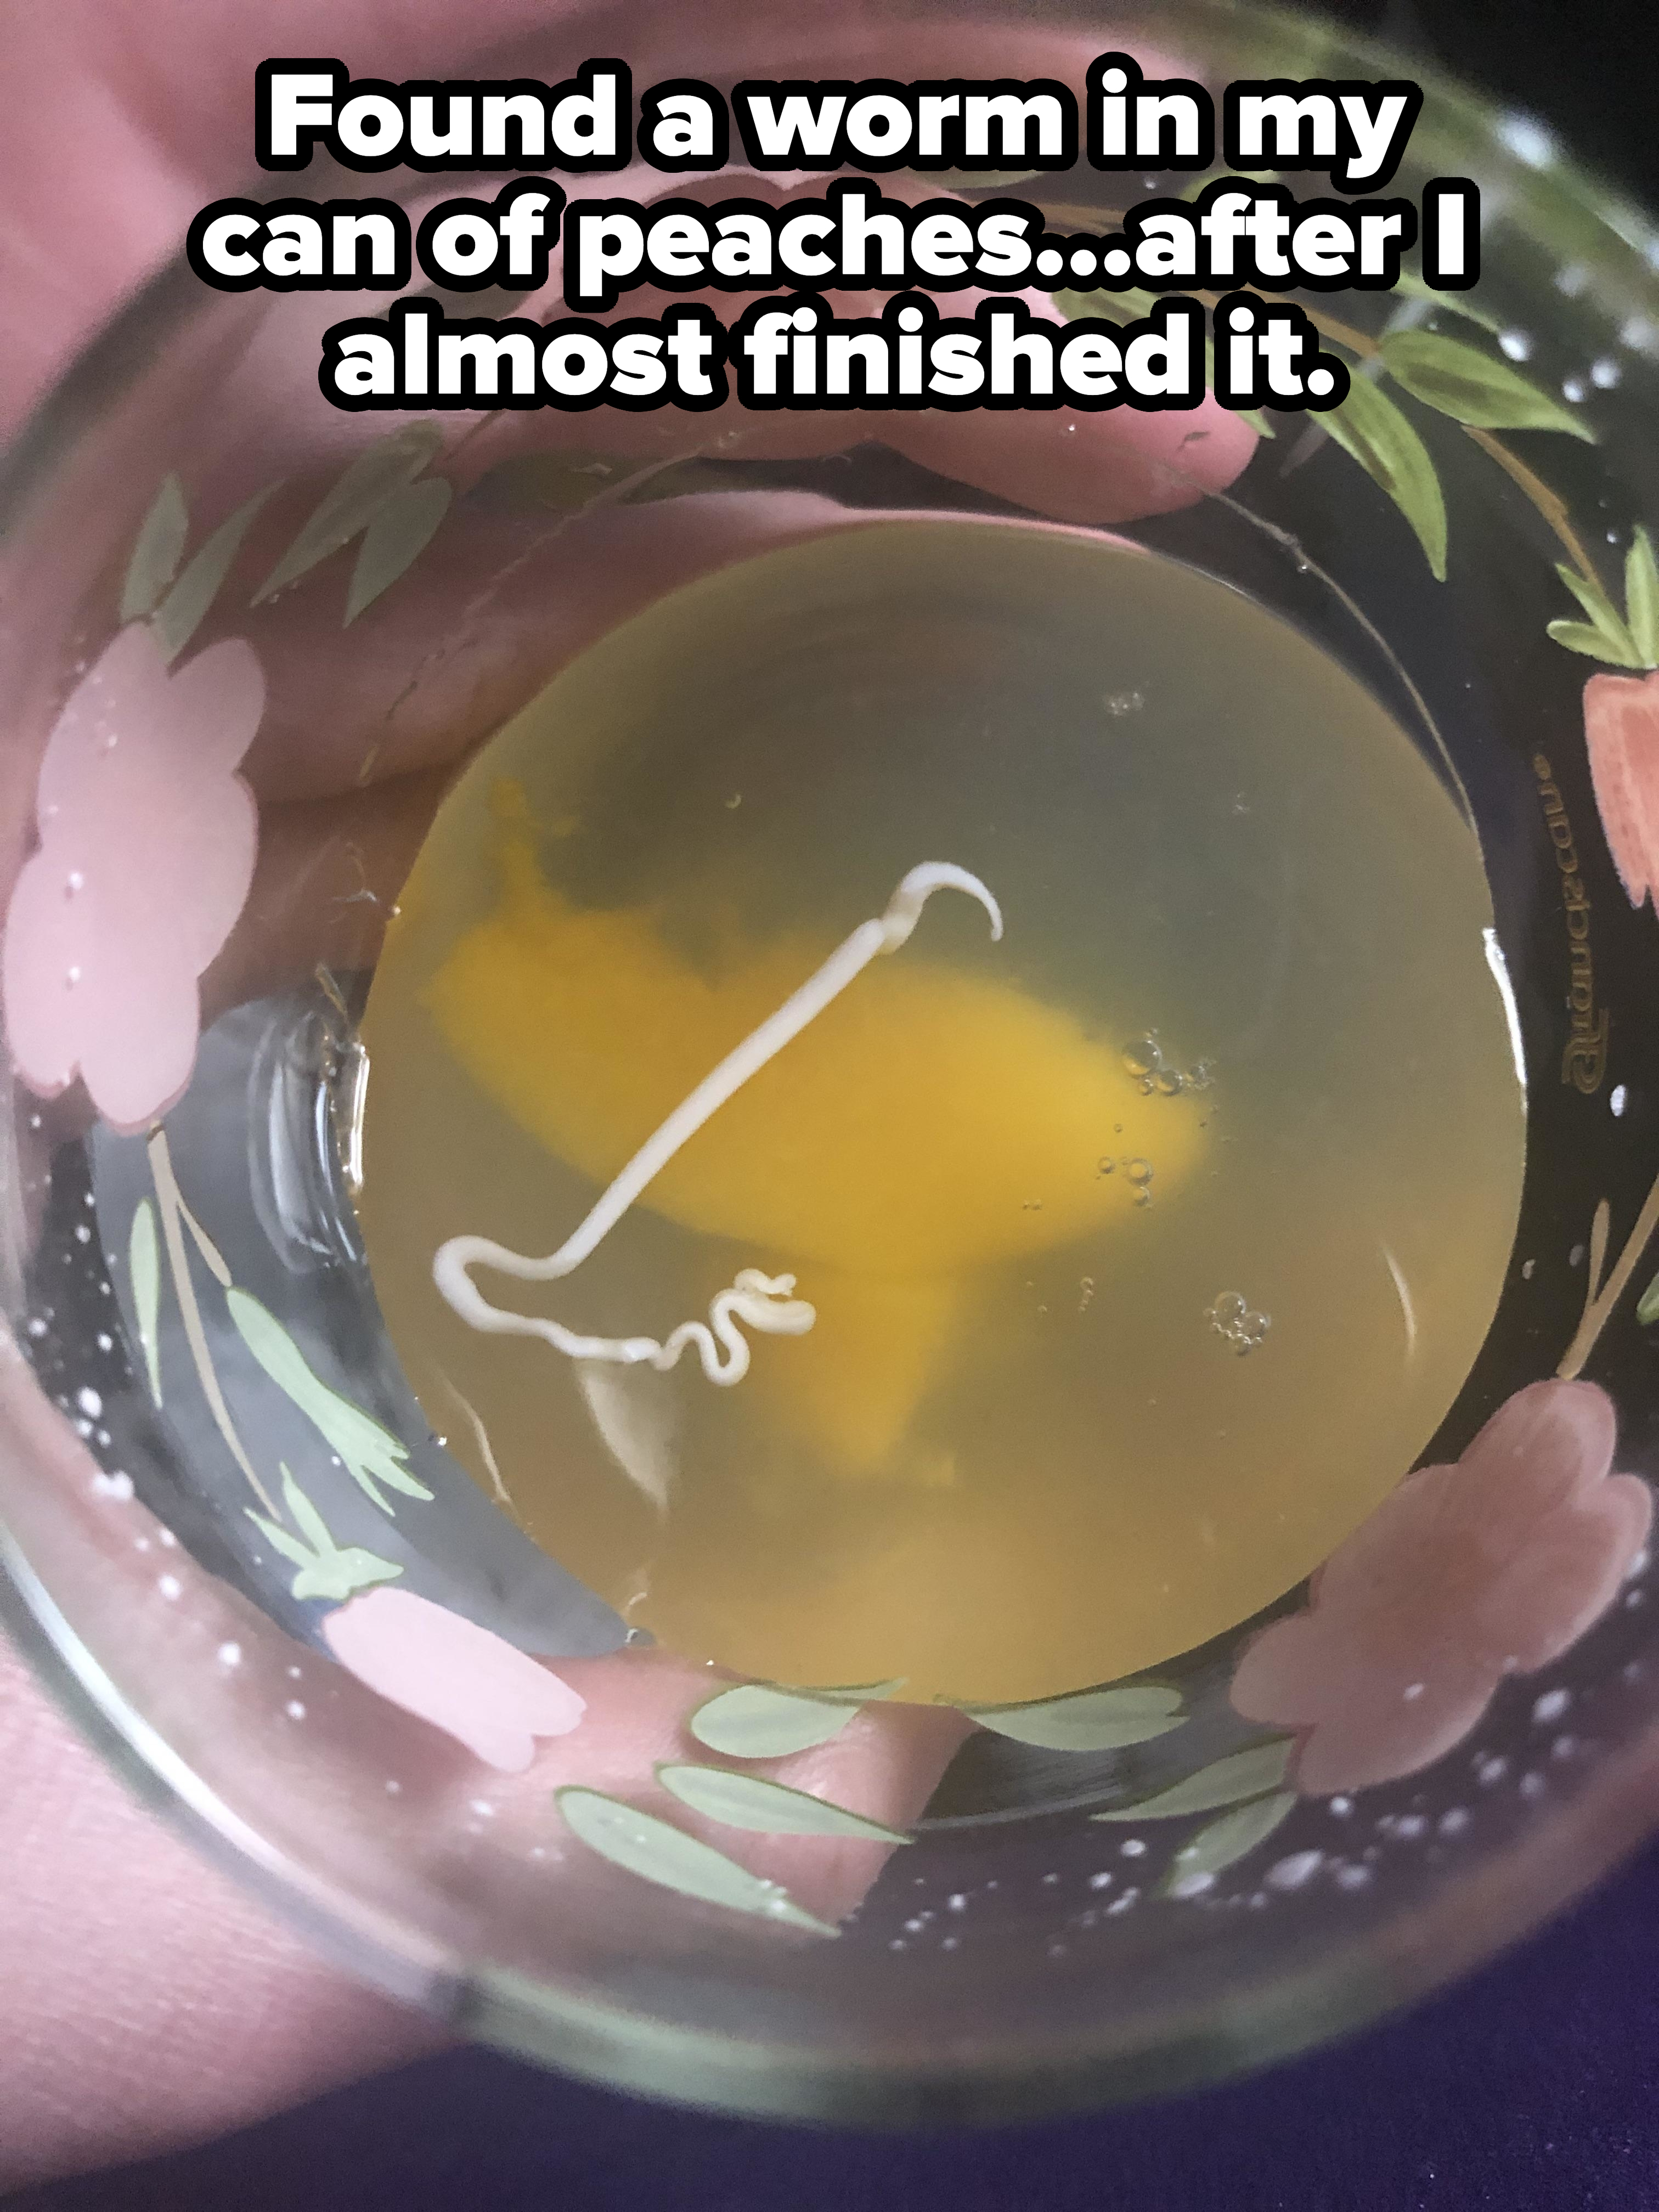 Liquid with some peach slices and a white squiggly object in a cup, with caption, &quot;Found a worm in my can of peaches after I almost finished it&quot;